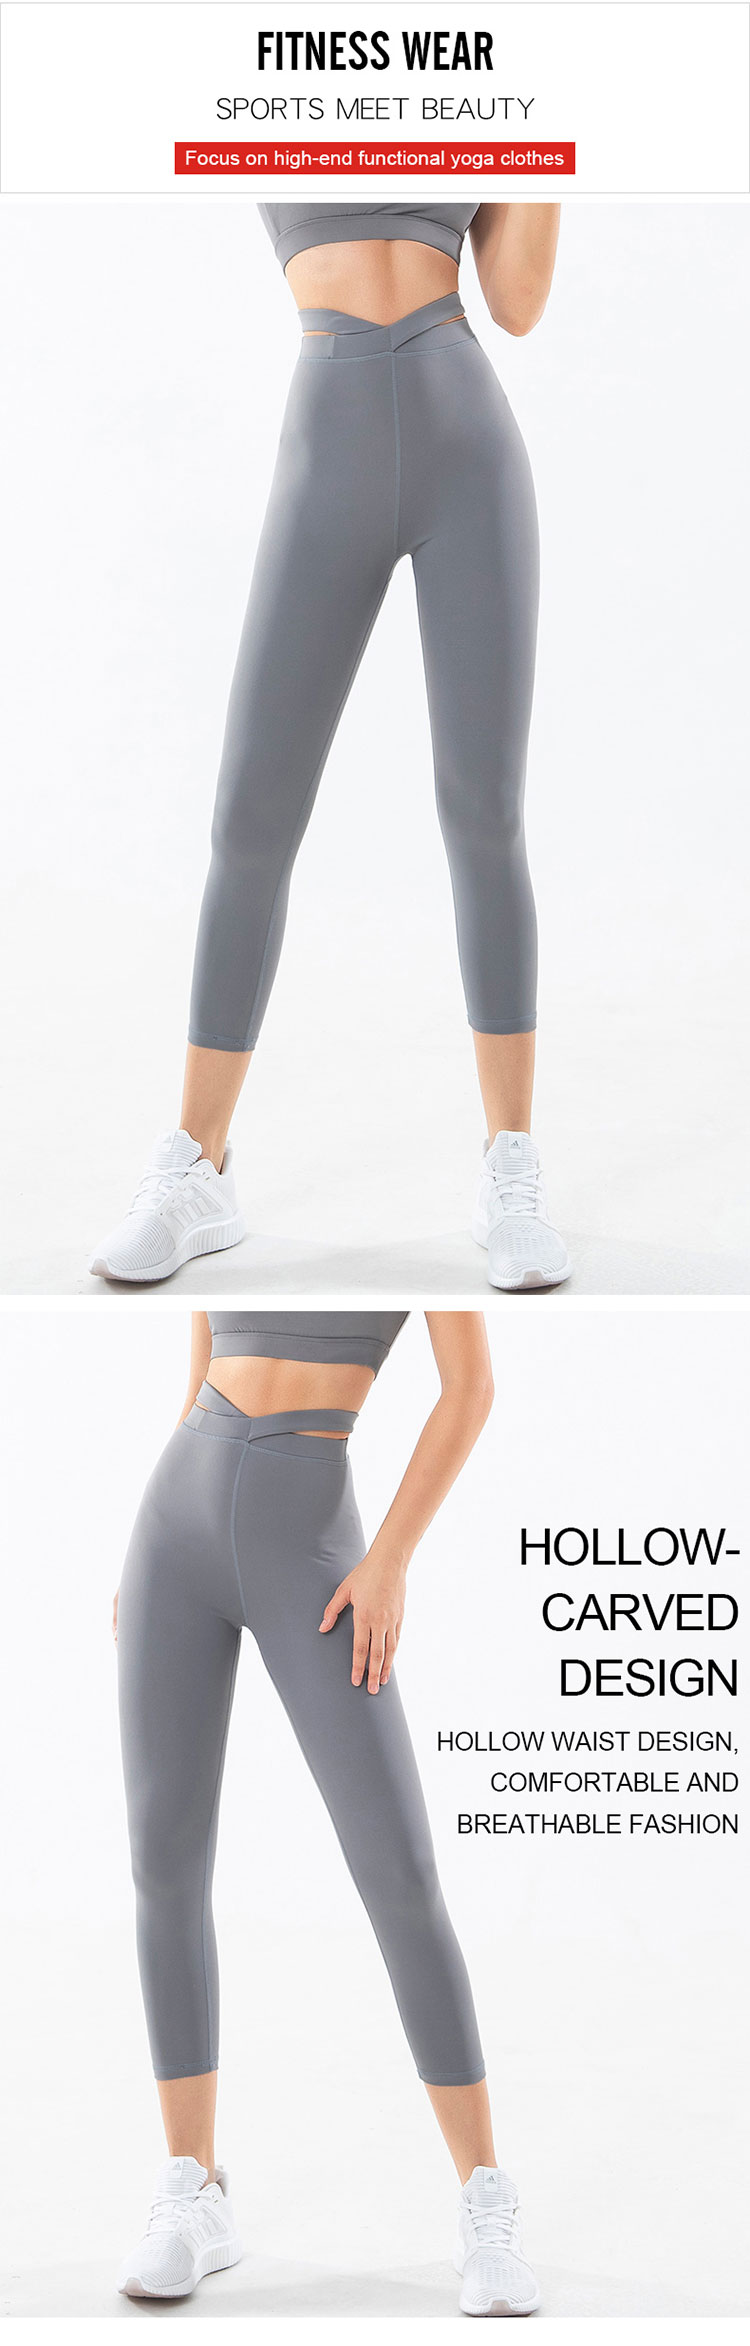 Long-yoga-pants-is-a-combination-of-primitive-and-modern-fitness.-Comfortable-meditation-and-gentle-movements